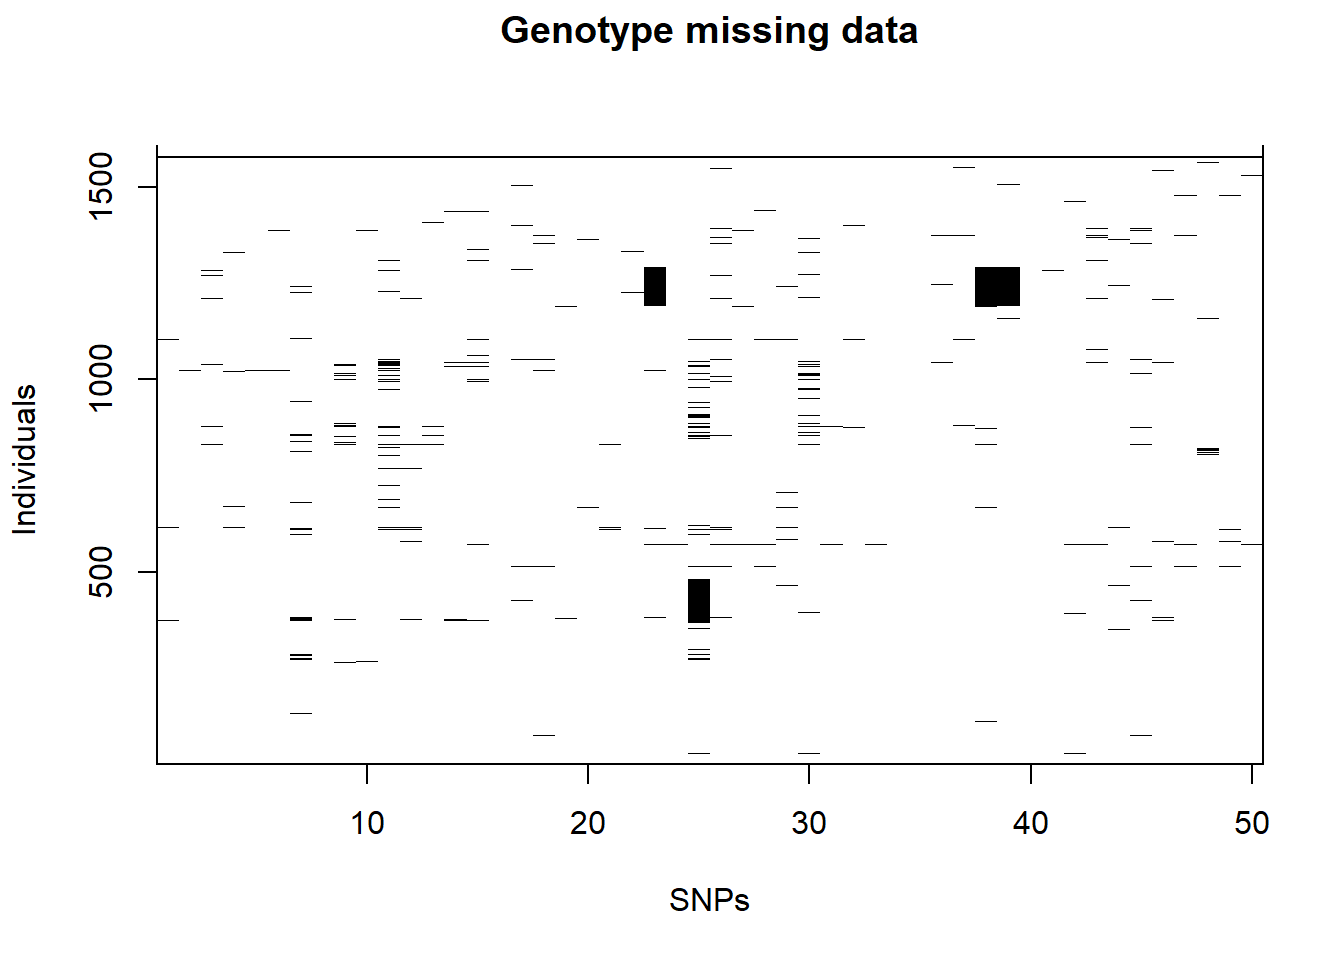 Missing genotypes. Black squares shows missing genotuype information of asthma data example.